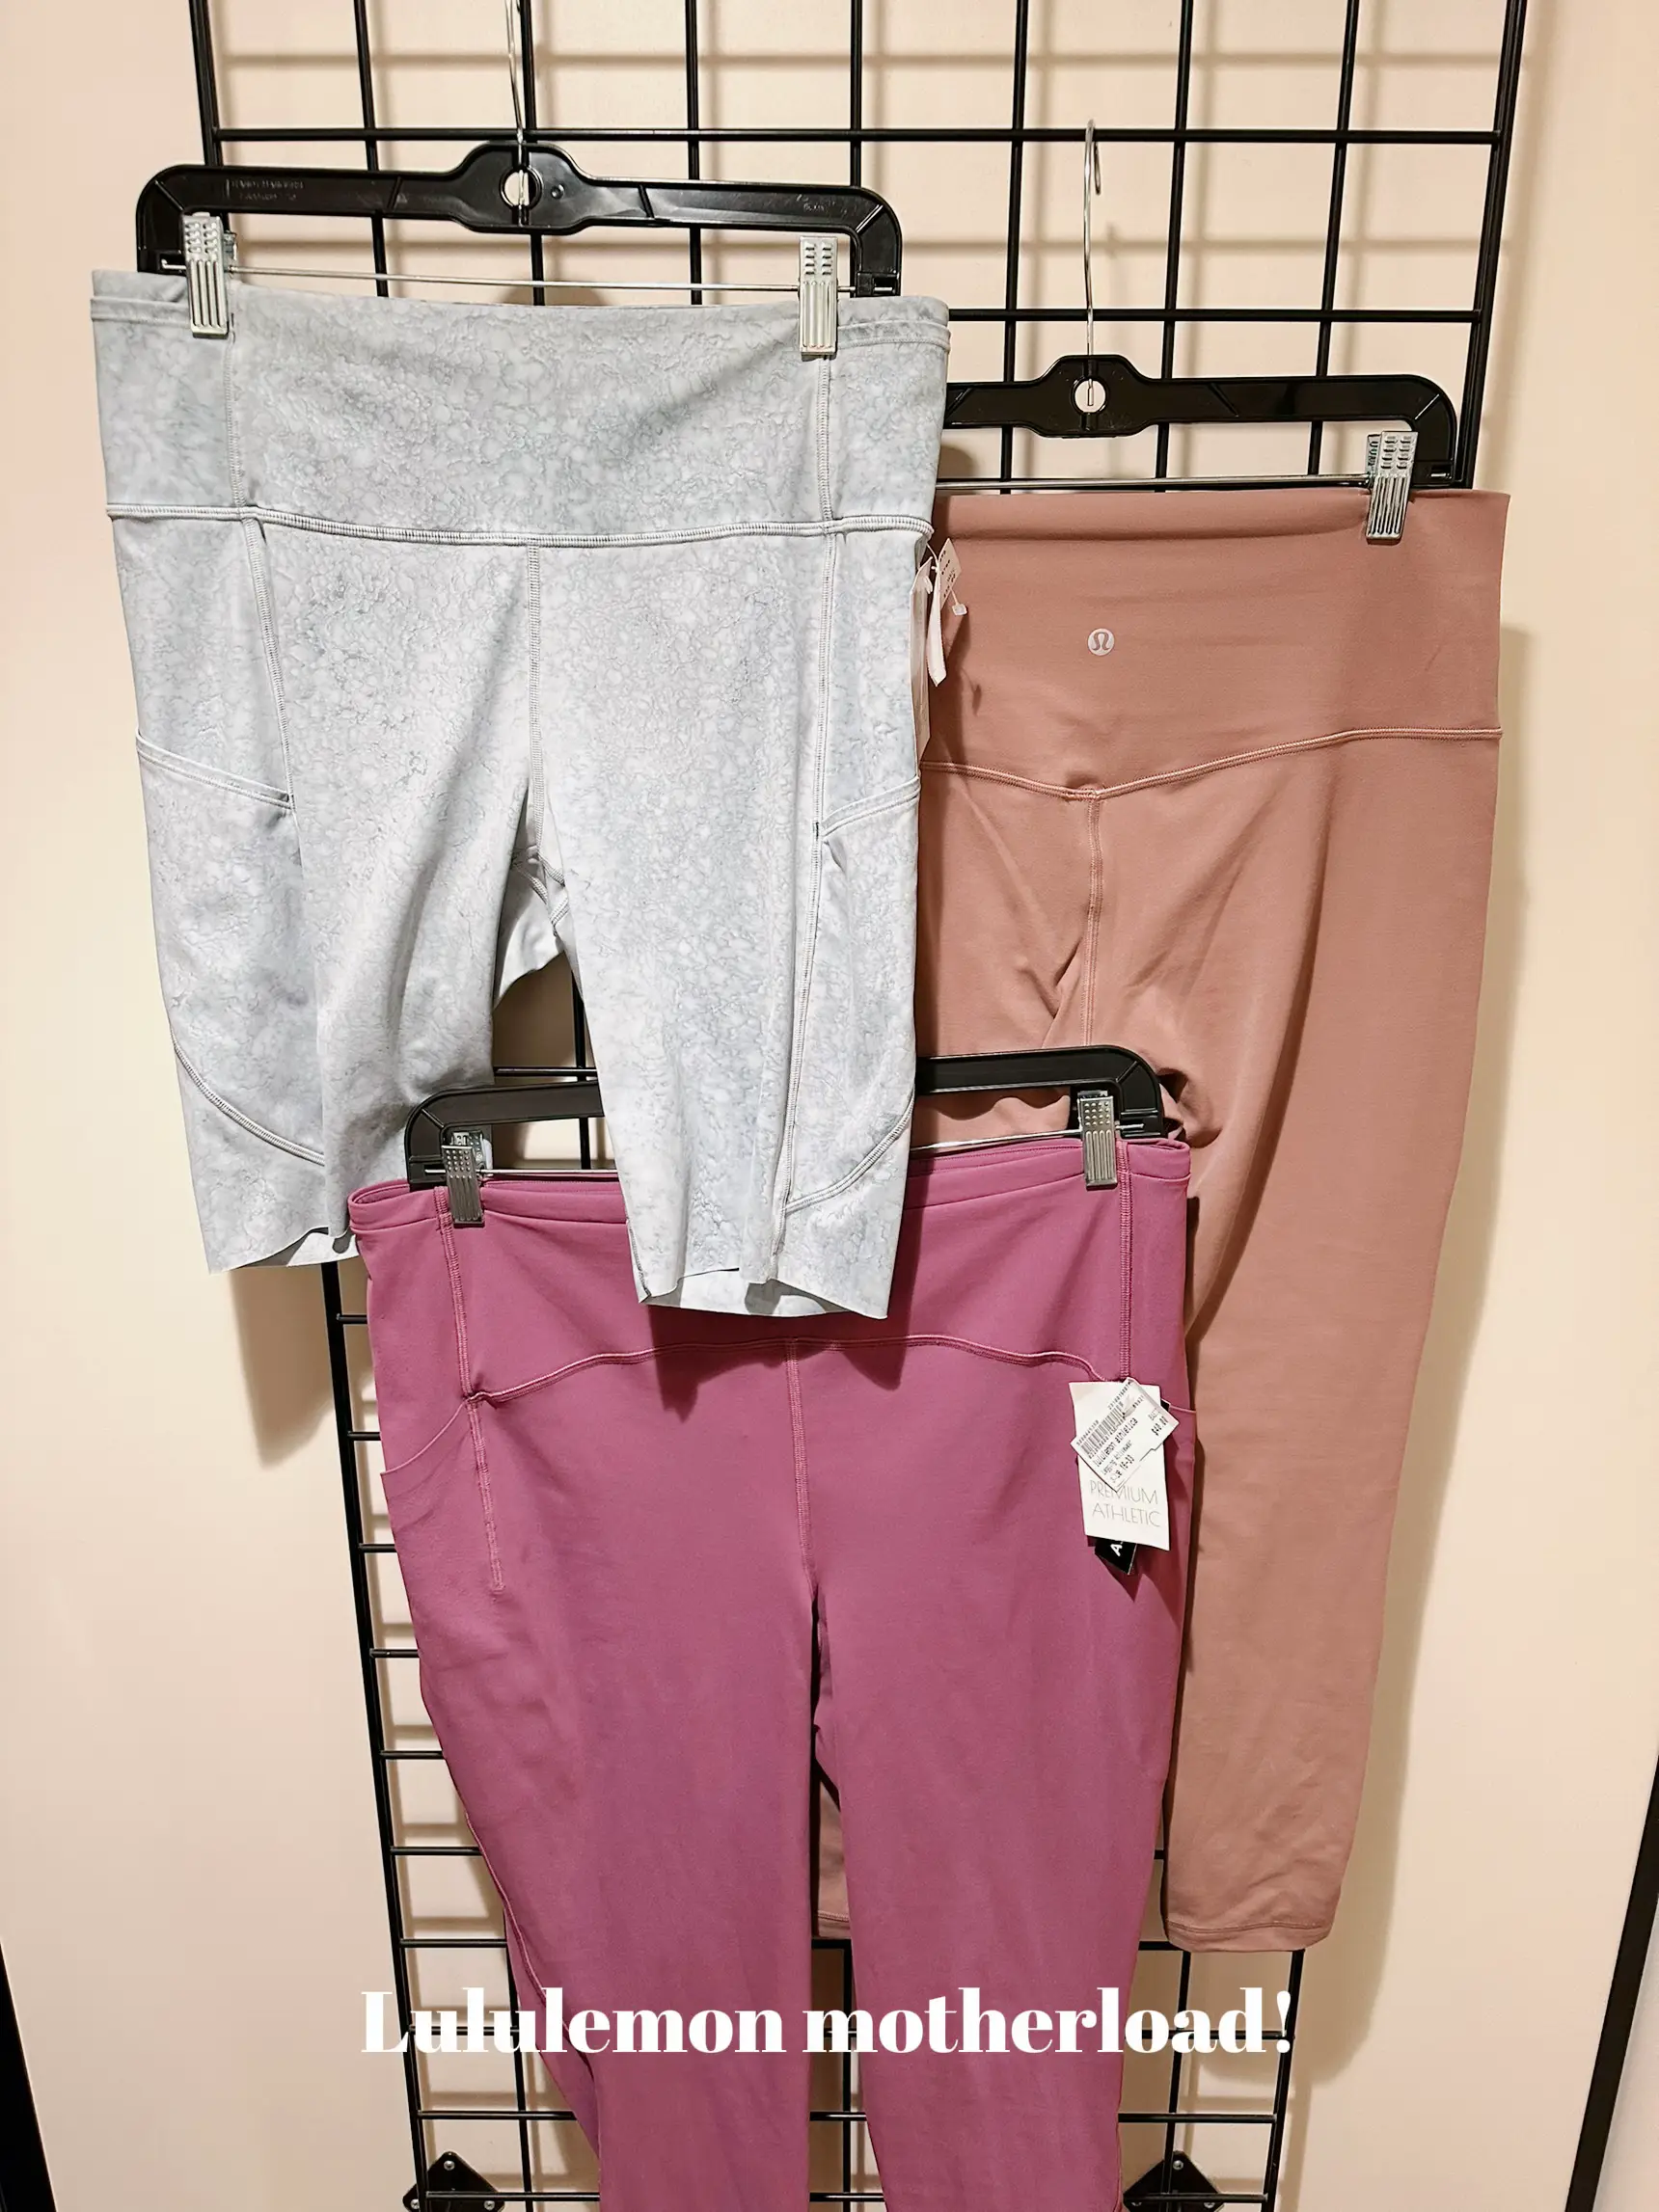 An in depth review of Balance Athletica's Cloud Pant aka “Aligns